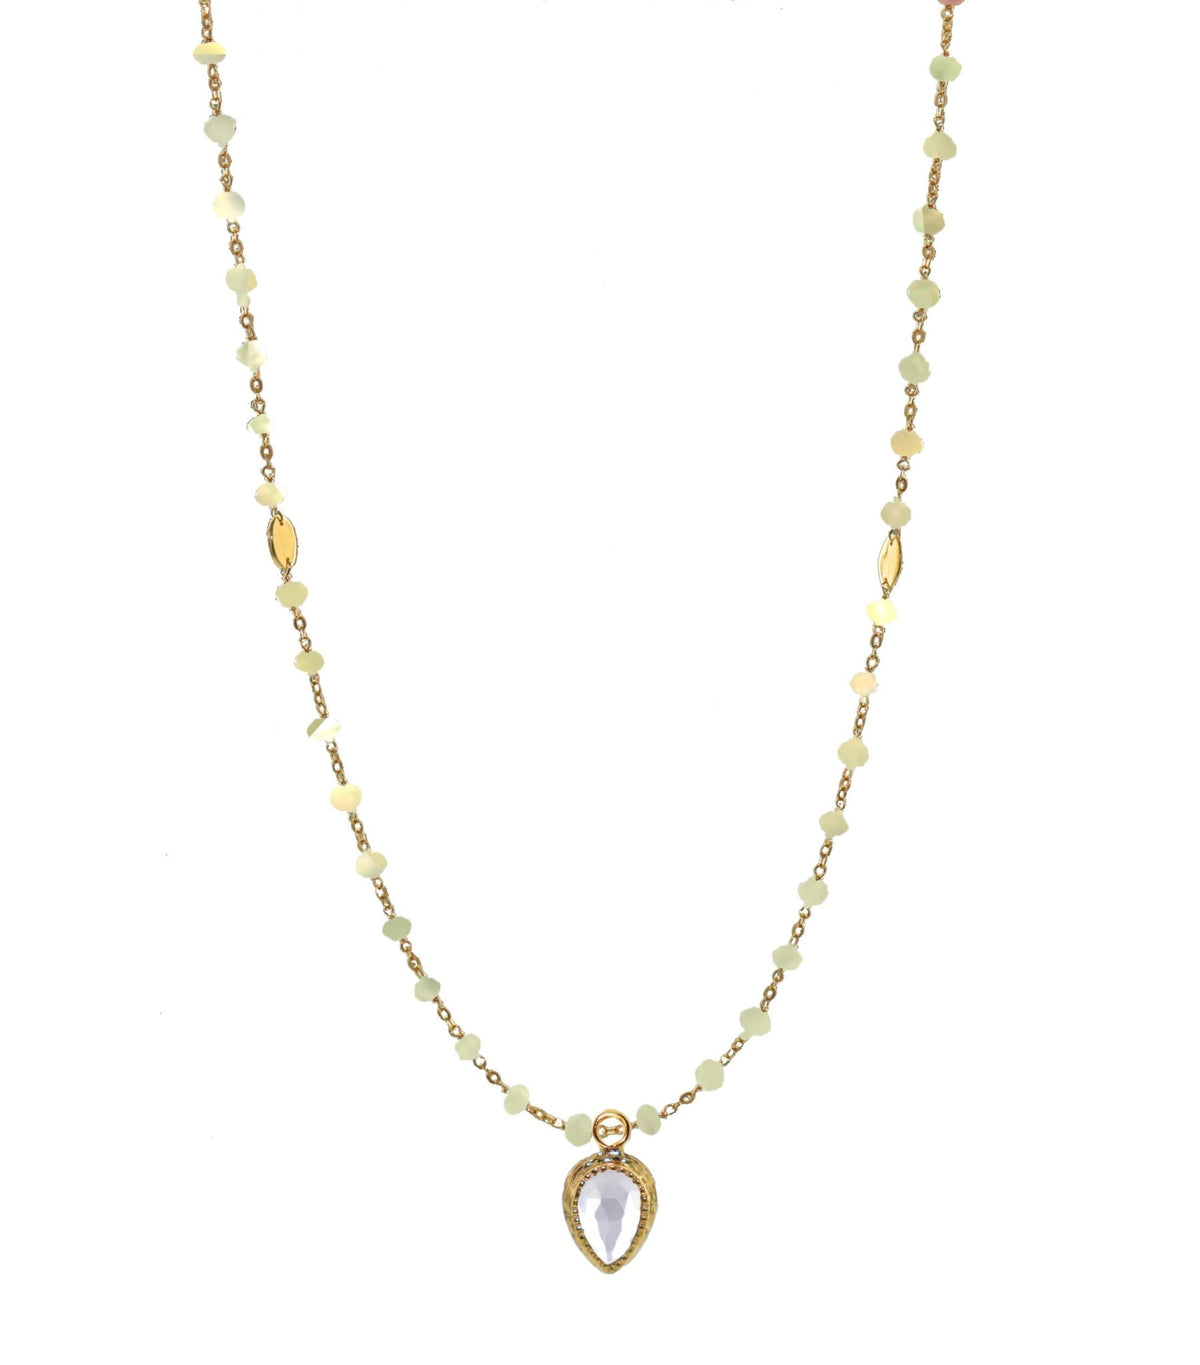 ICONIC LONG BEADED NECKLACE - RAINBOW MOONSTONE &amp; GOLD 34&quot; - SO PRETTY CARA COTTER